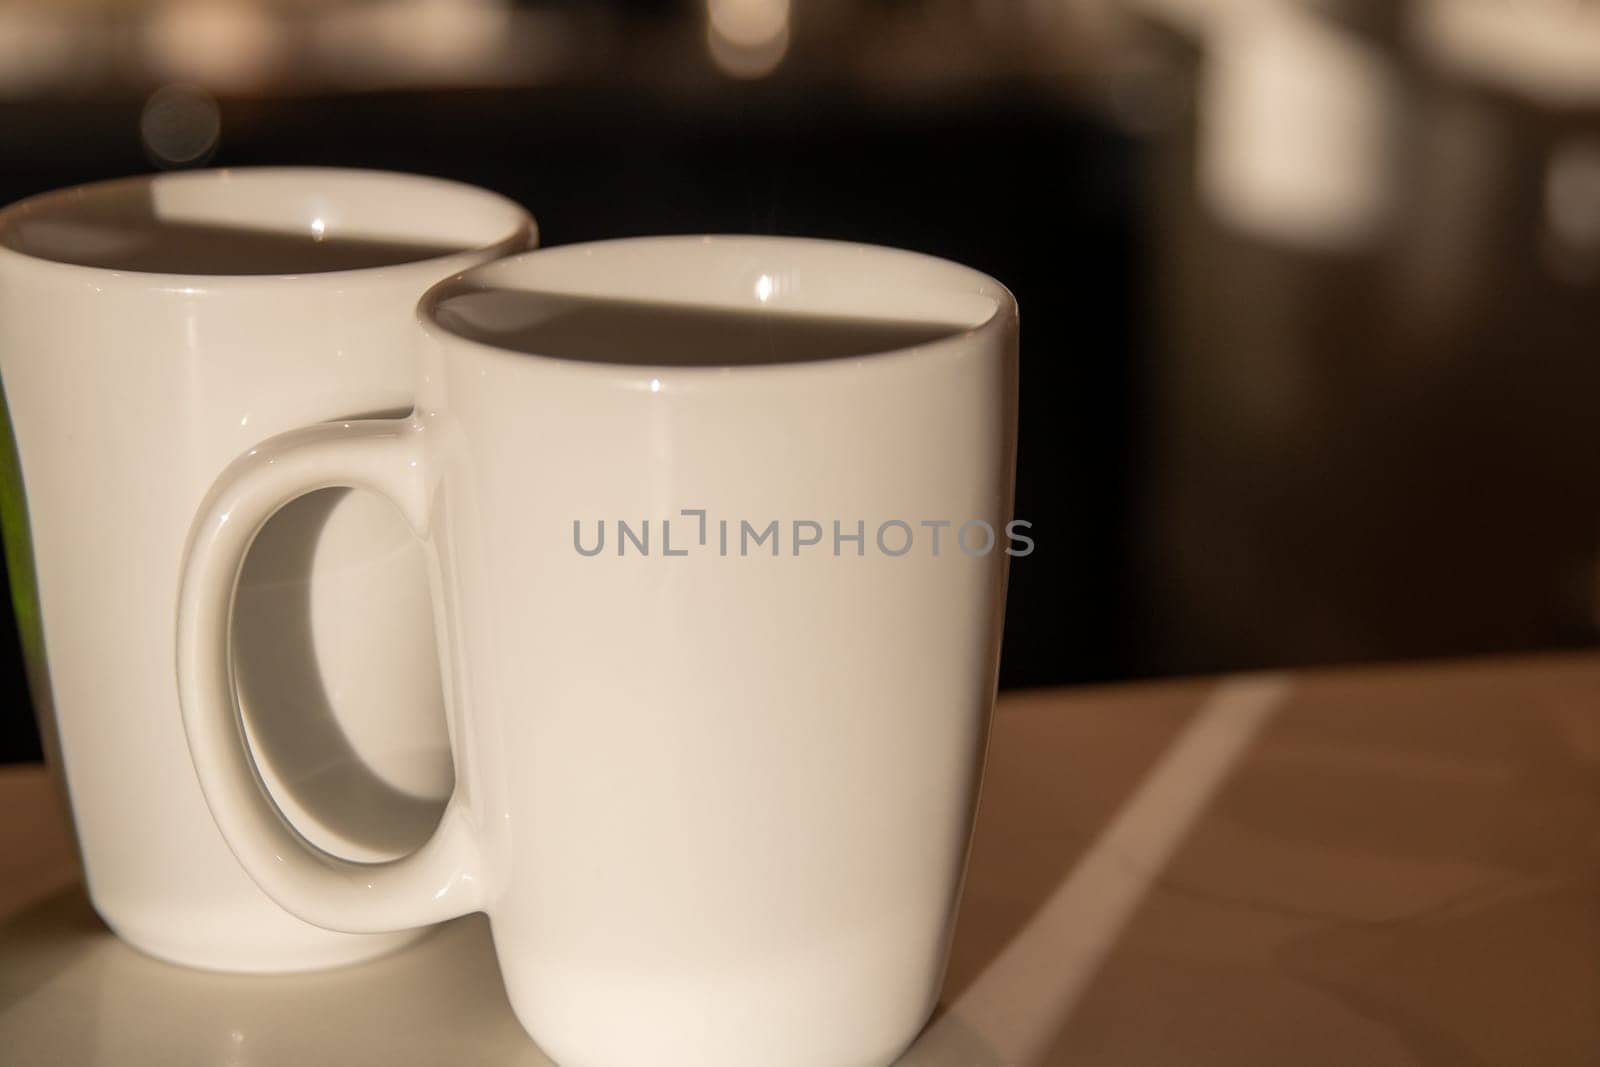 Duo of Coffee or tea mugs ready for beverage